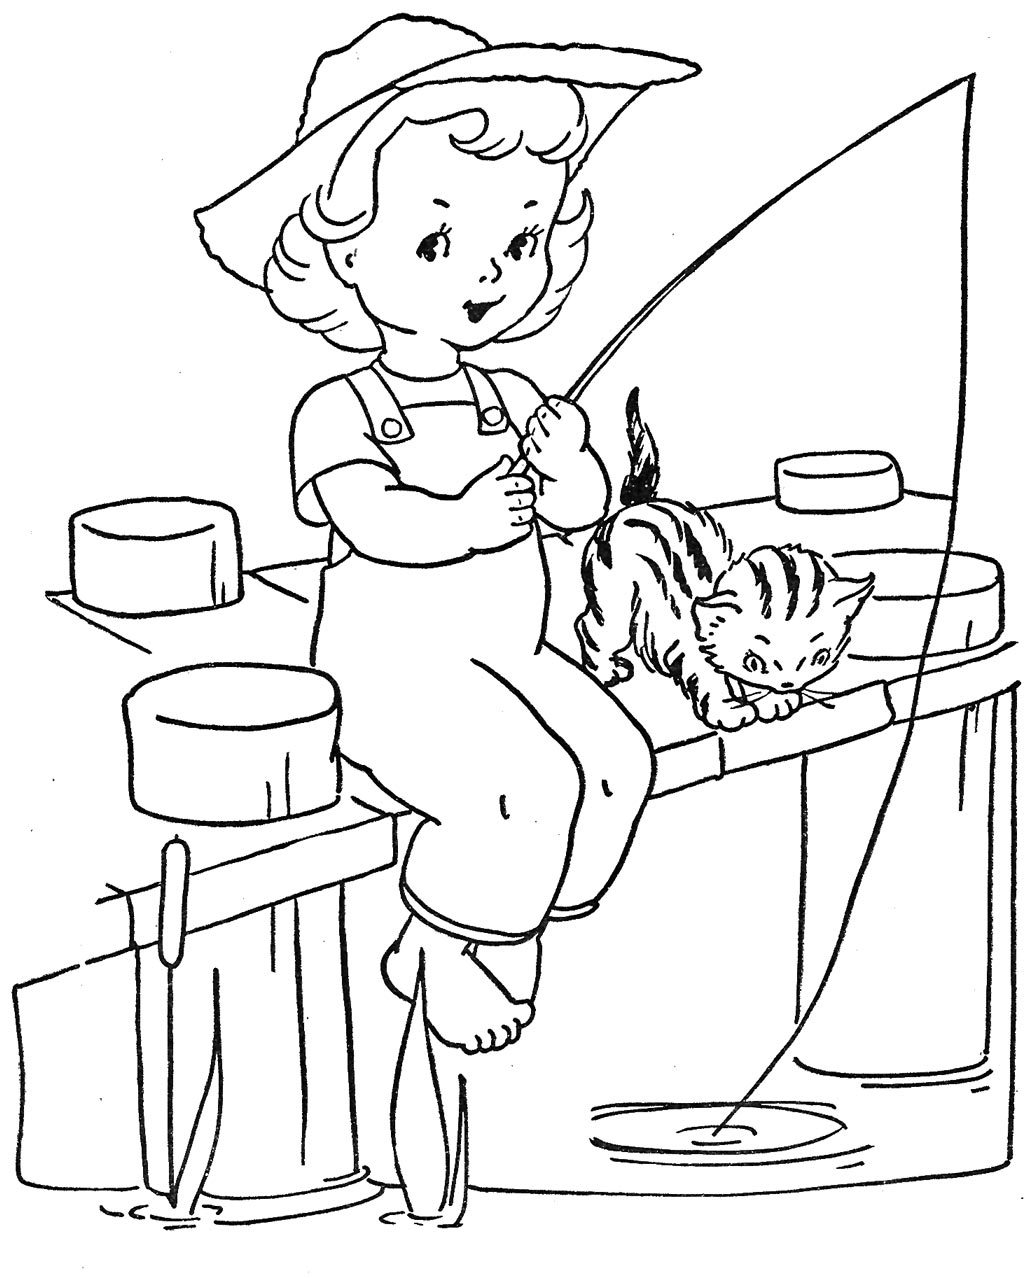 Pier Fishings Coloring Page